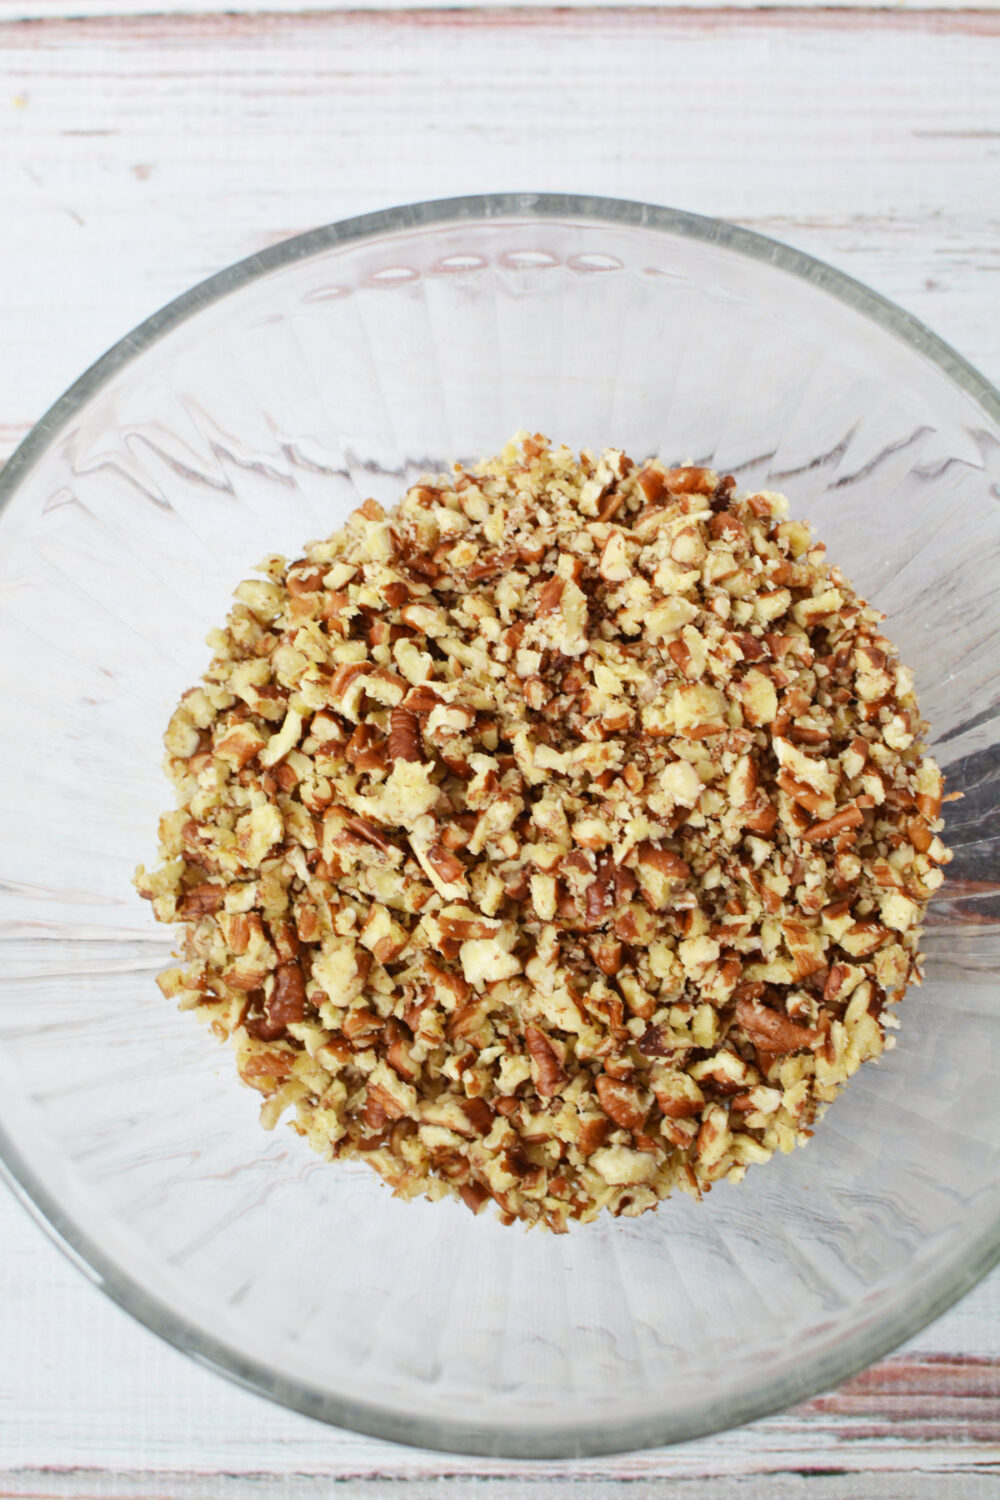 Chopped pecans in a bowl.